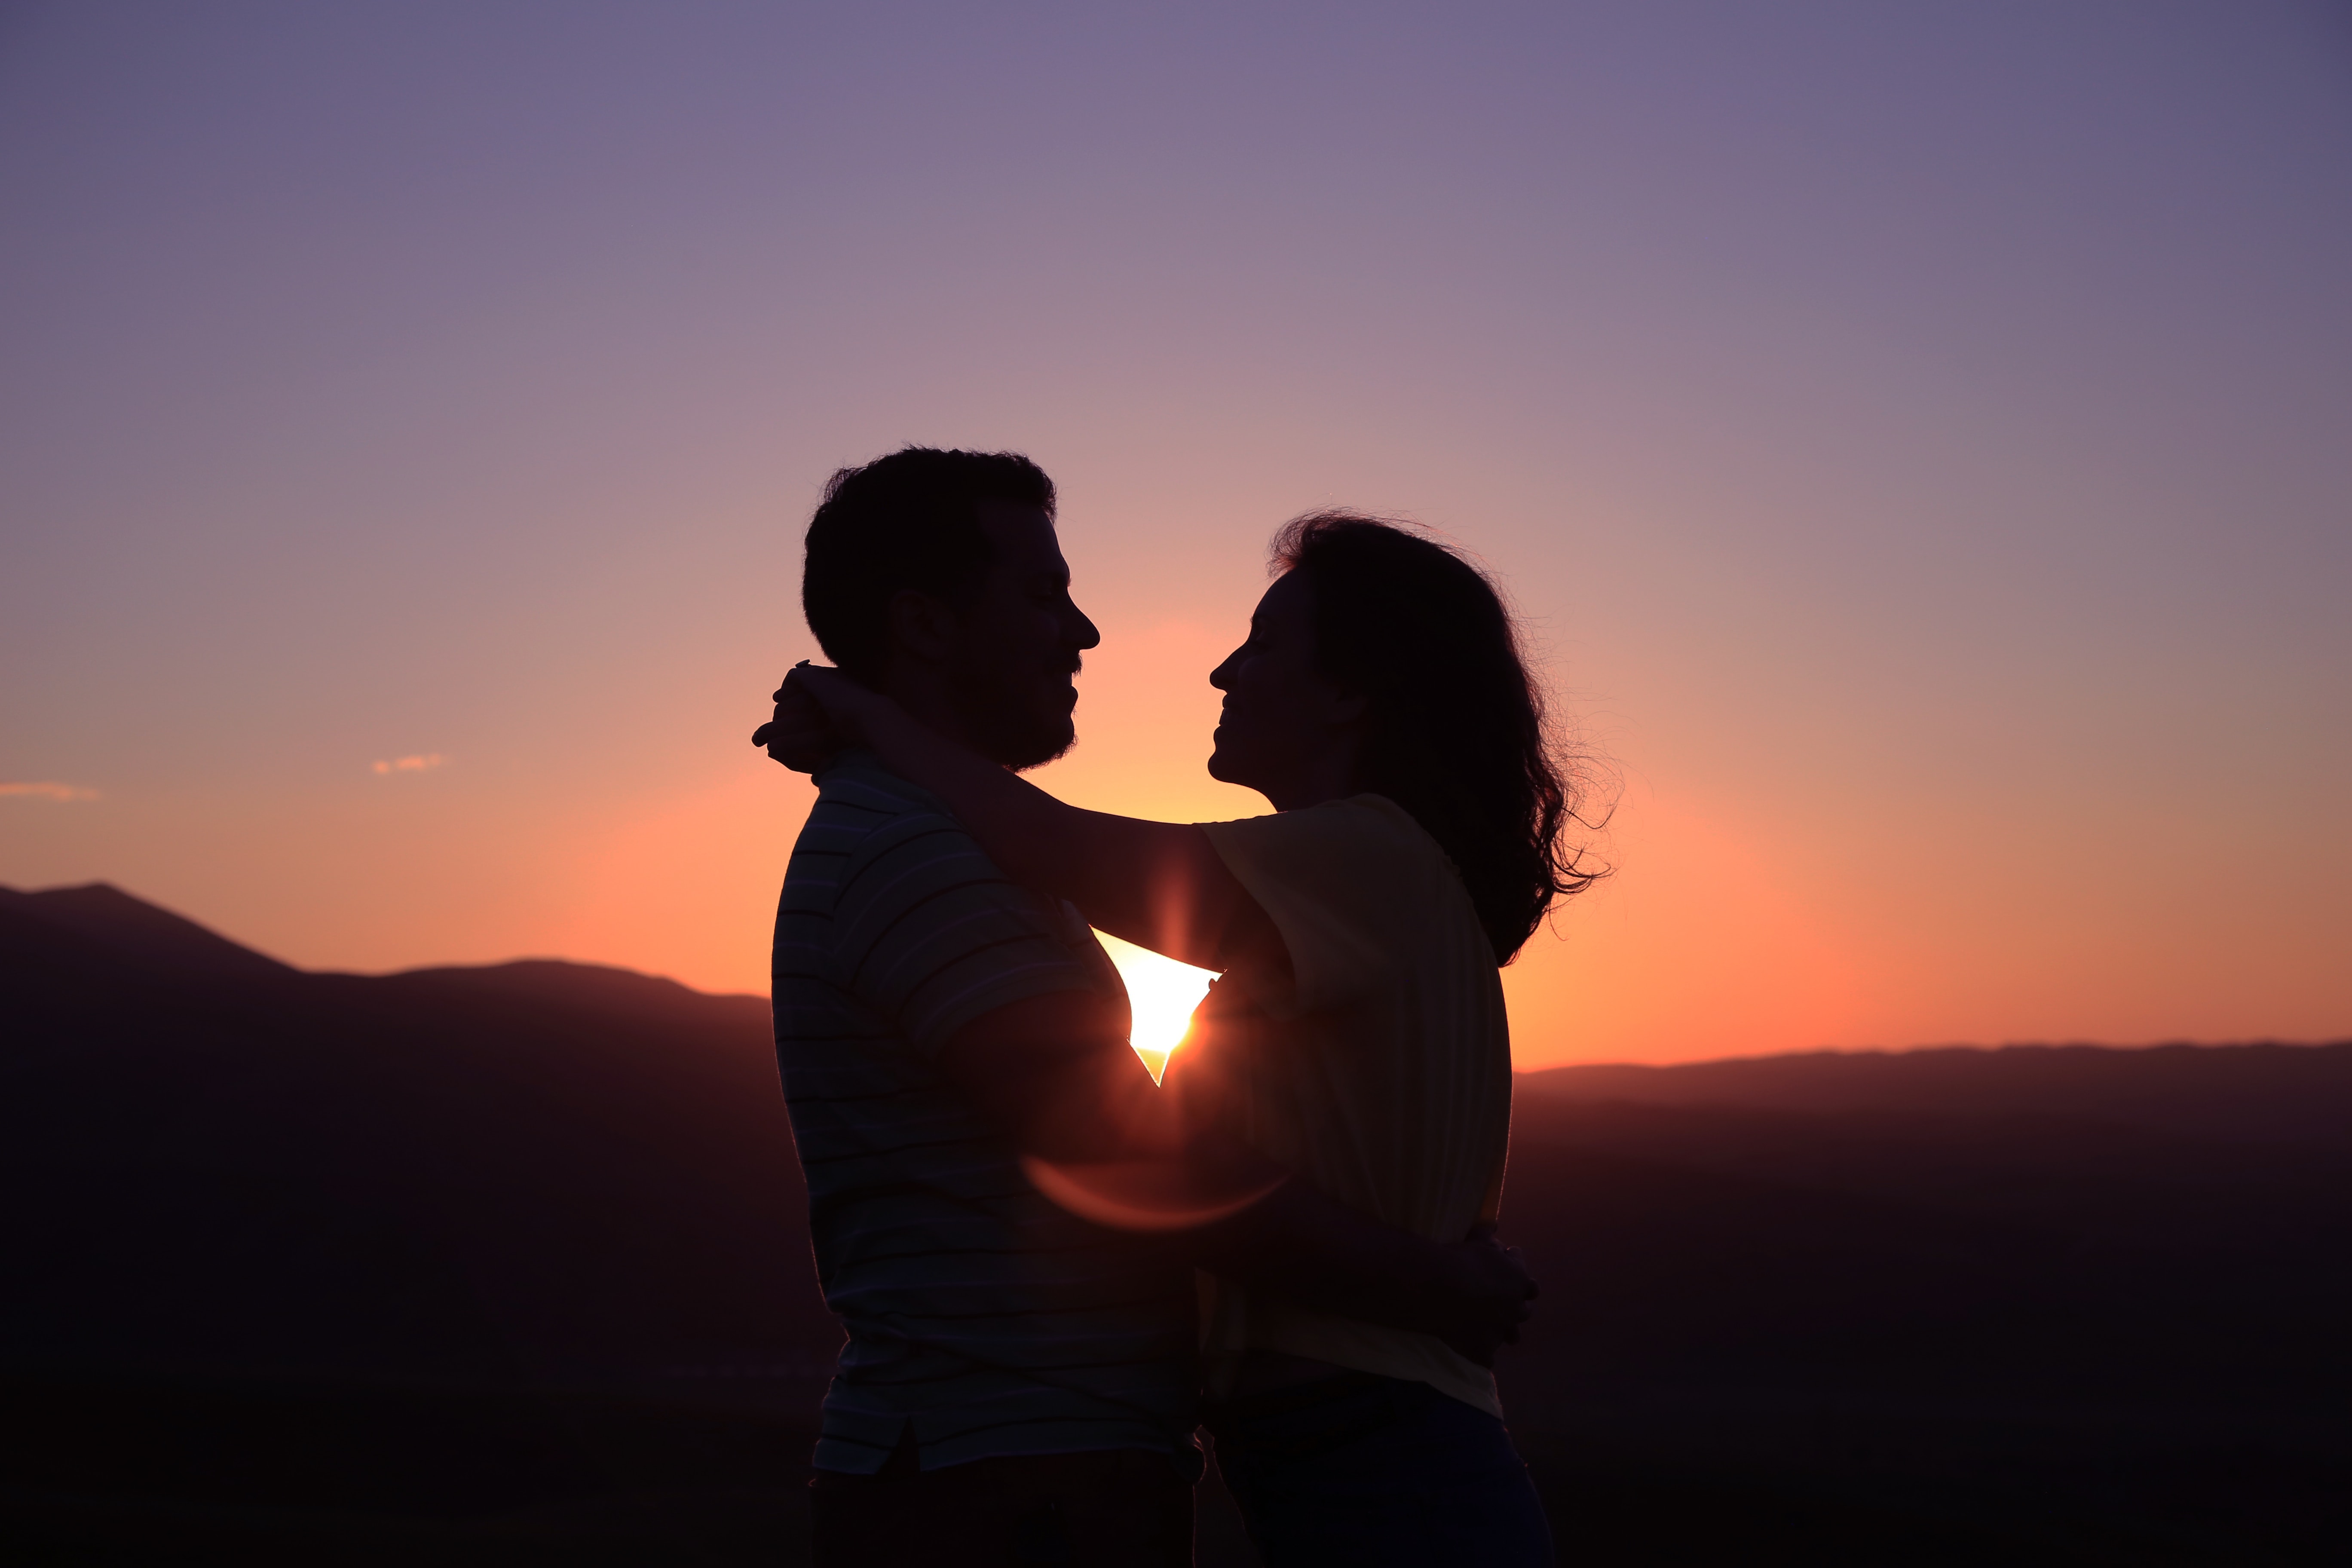 A couple standing in front of a sunset. | Source: Unsplash